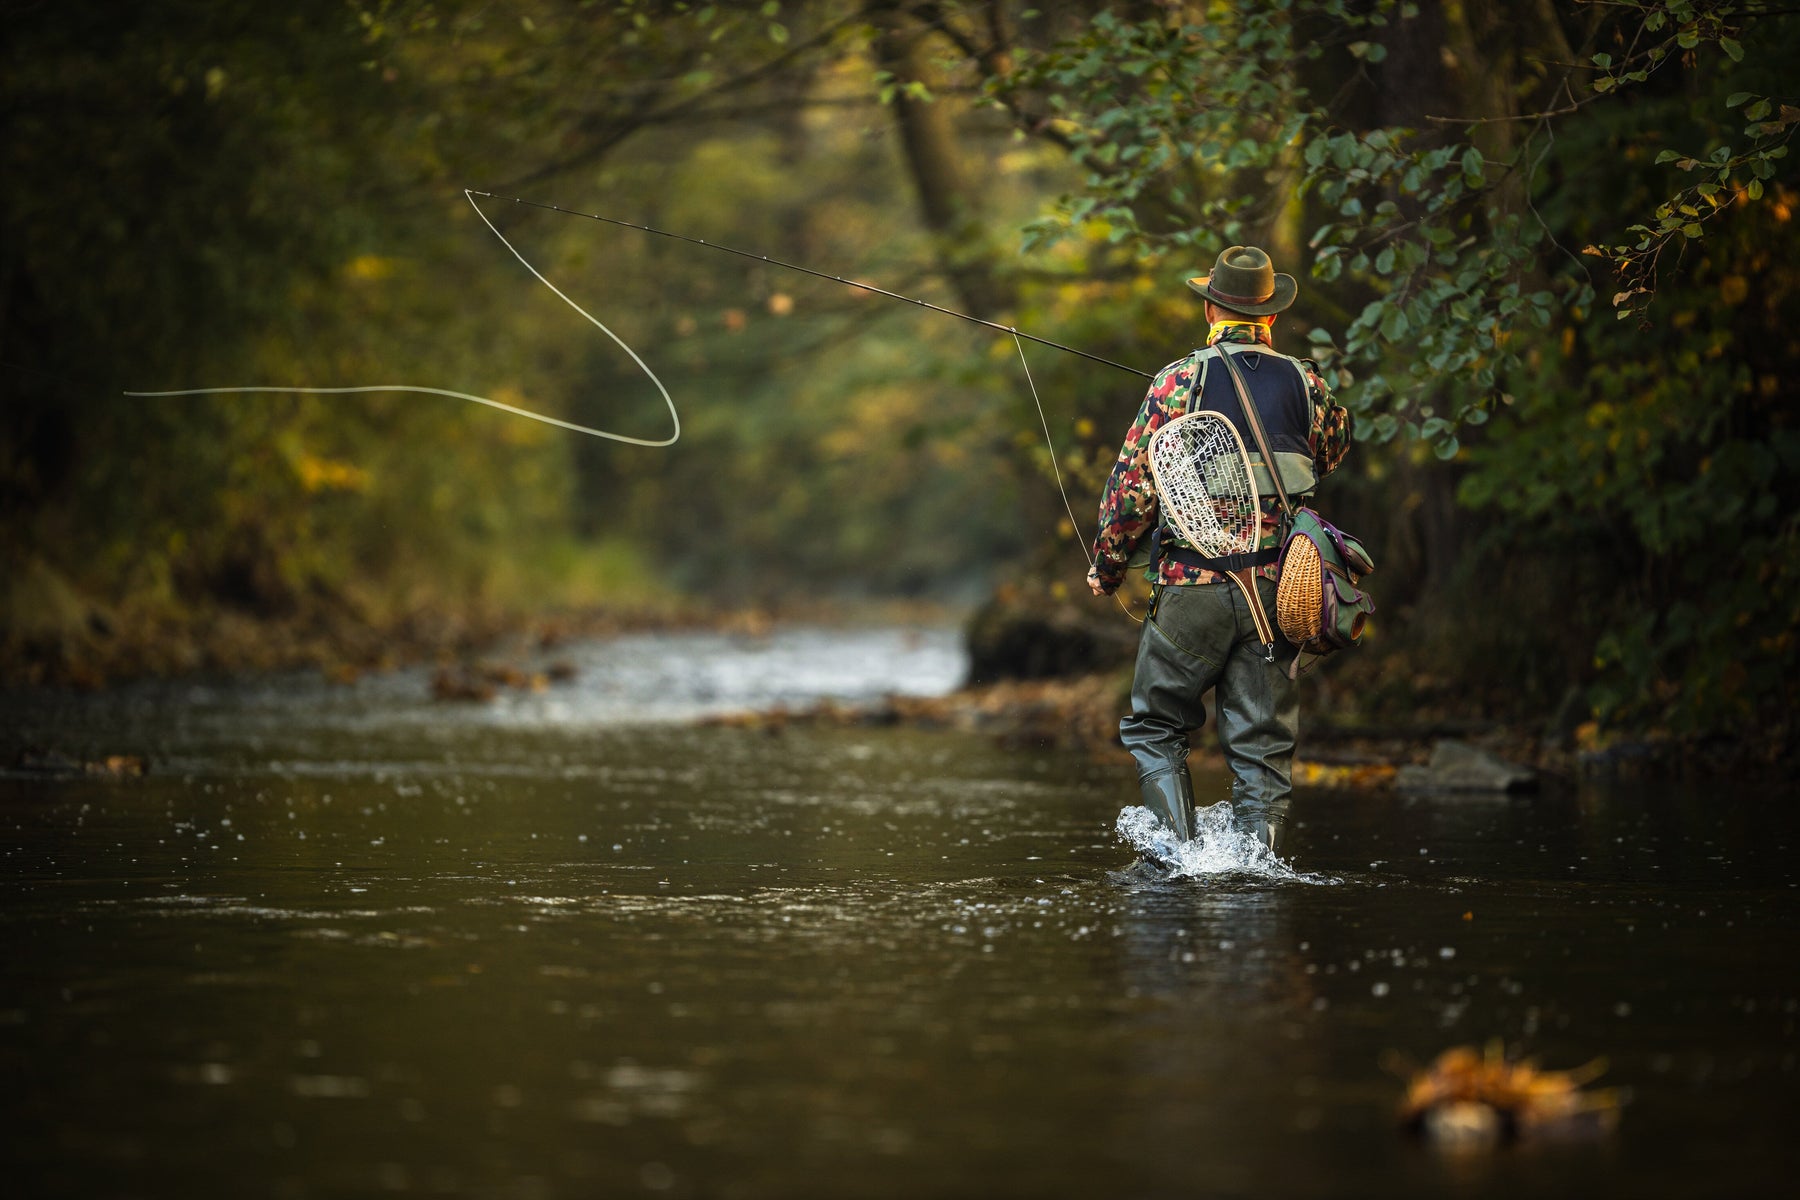 Fly Fishing 101: The Knowledge and Gear to Get Going